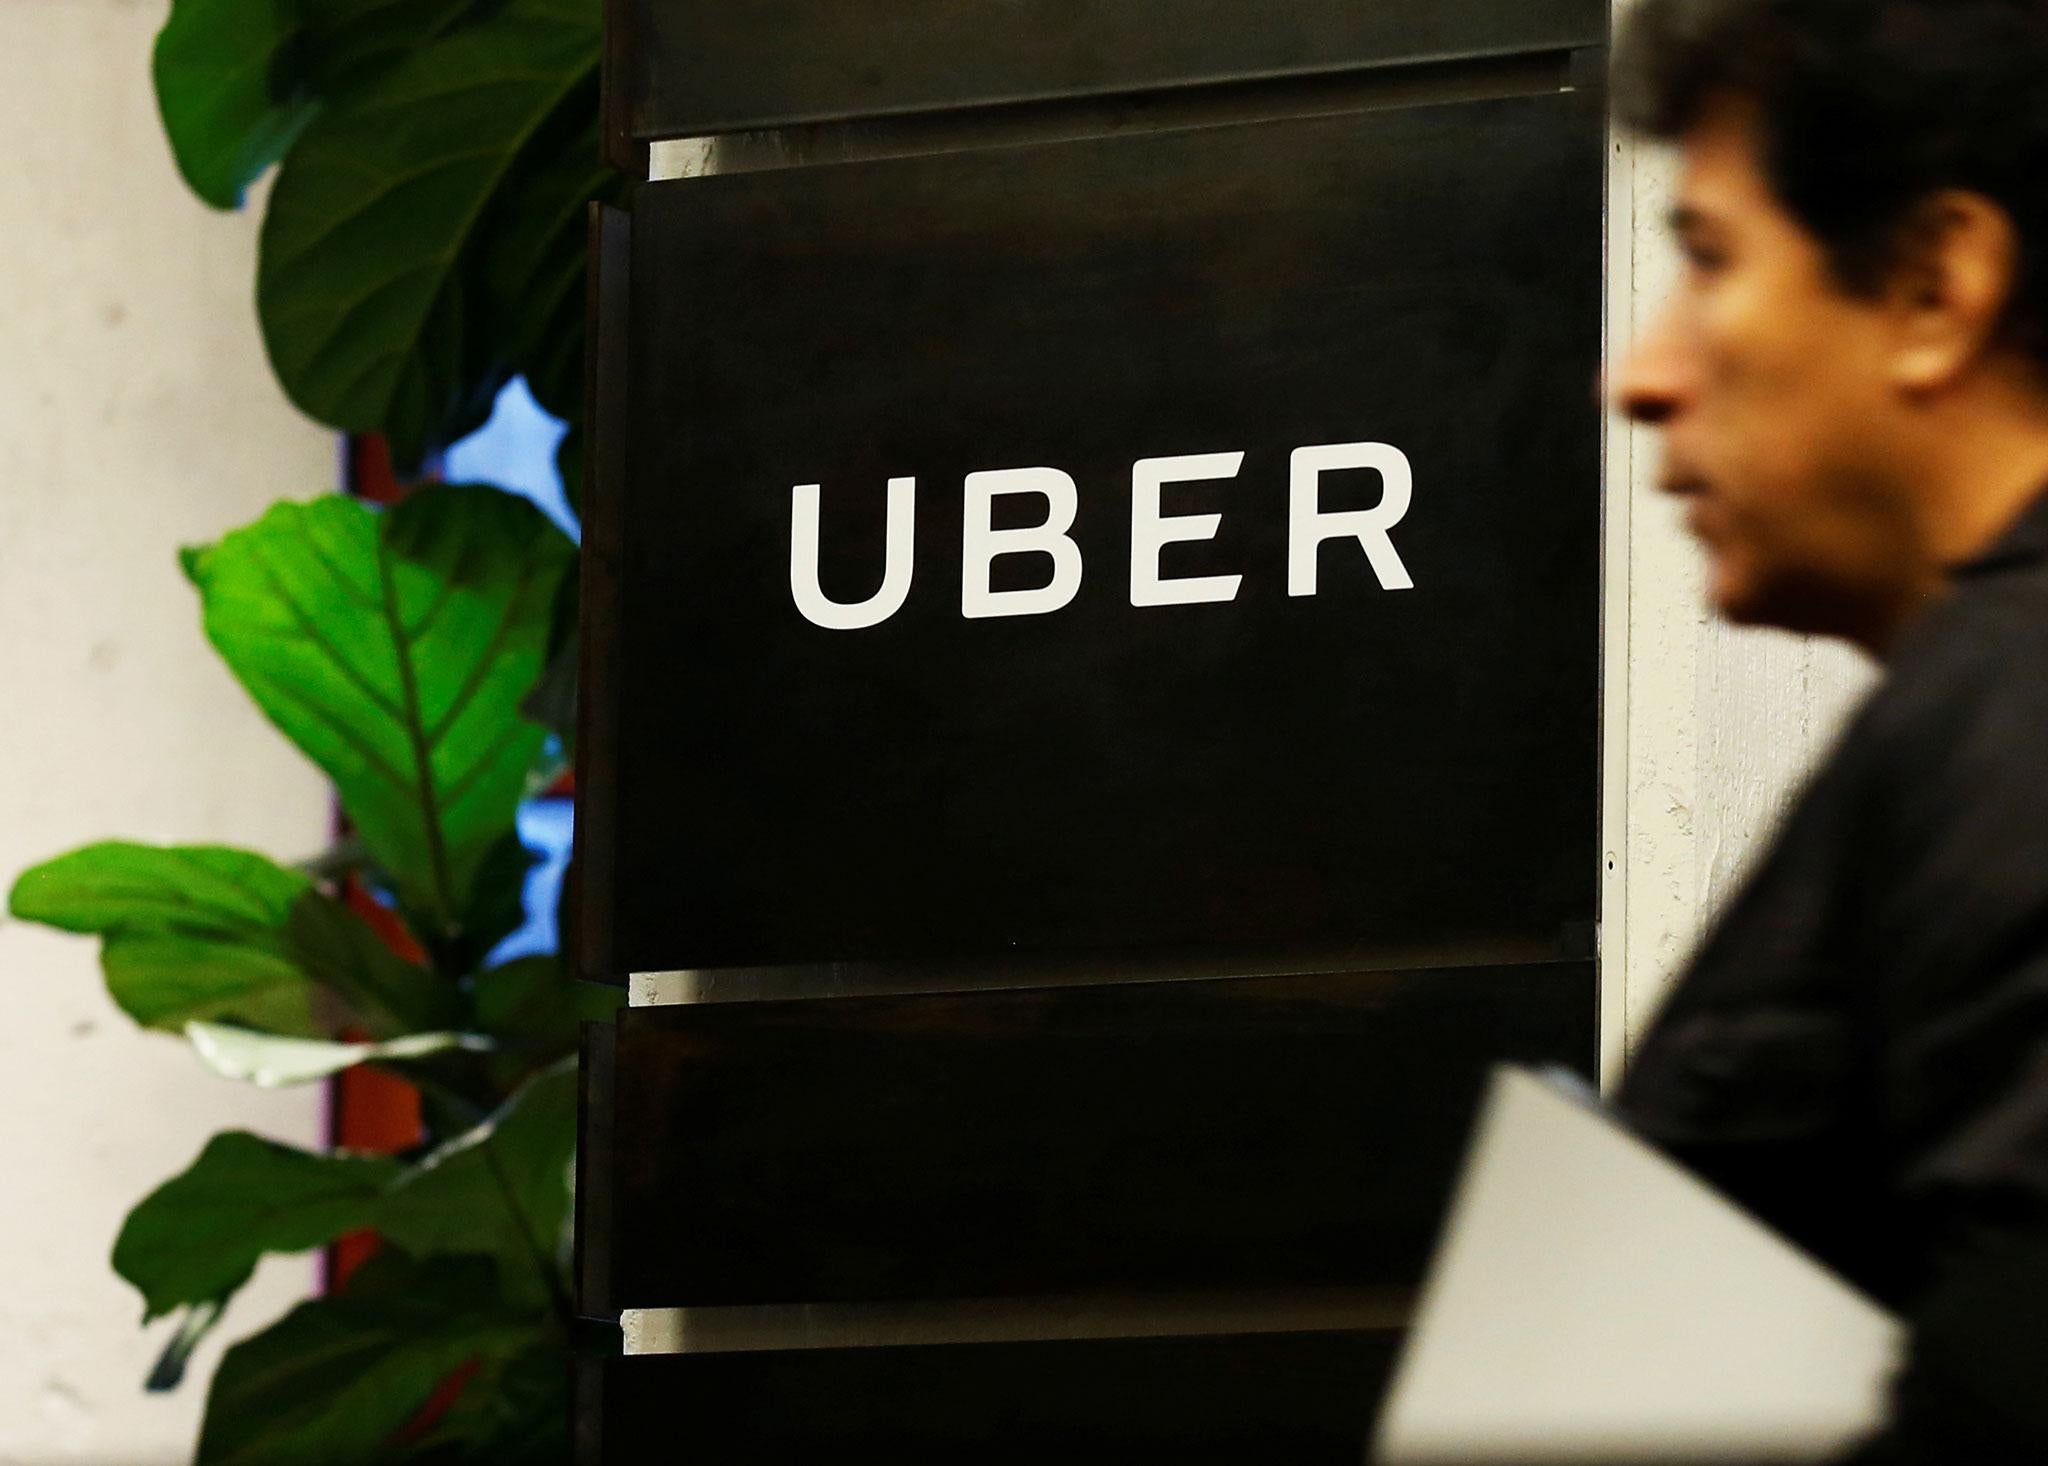 Uber is working with law firm O’Melveny & Myers to examine records of foreign payments and interview employees